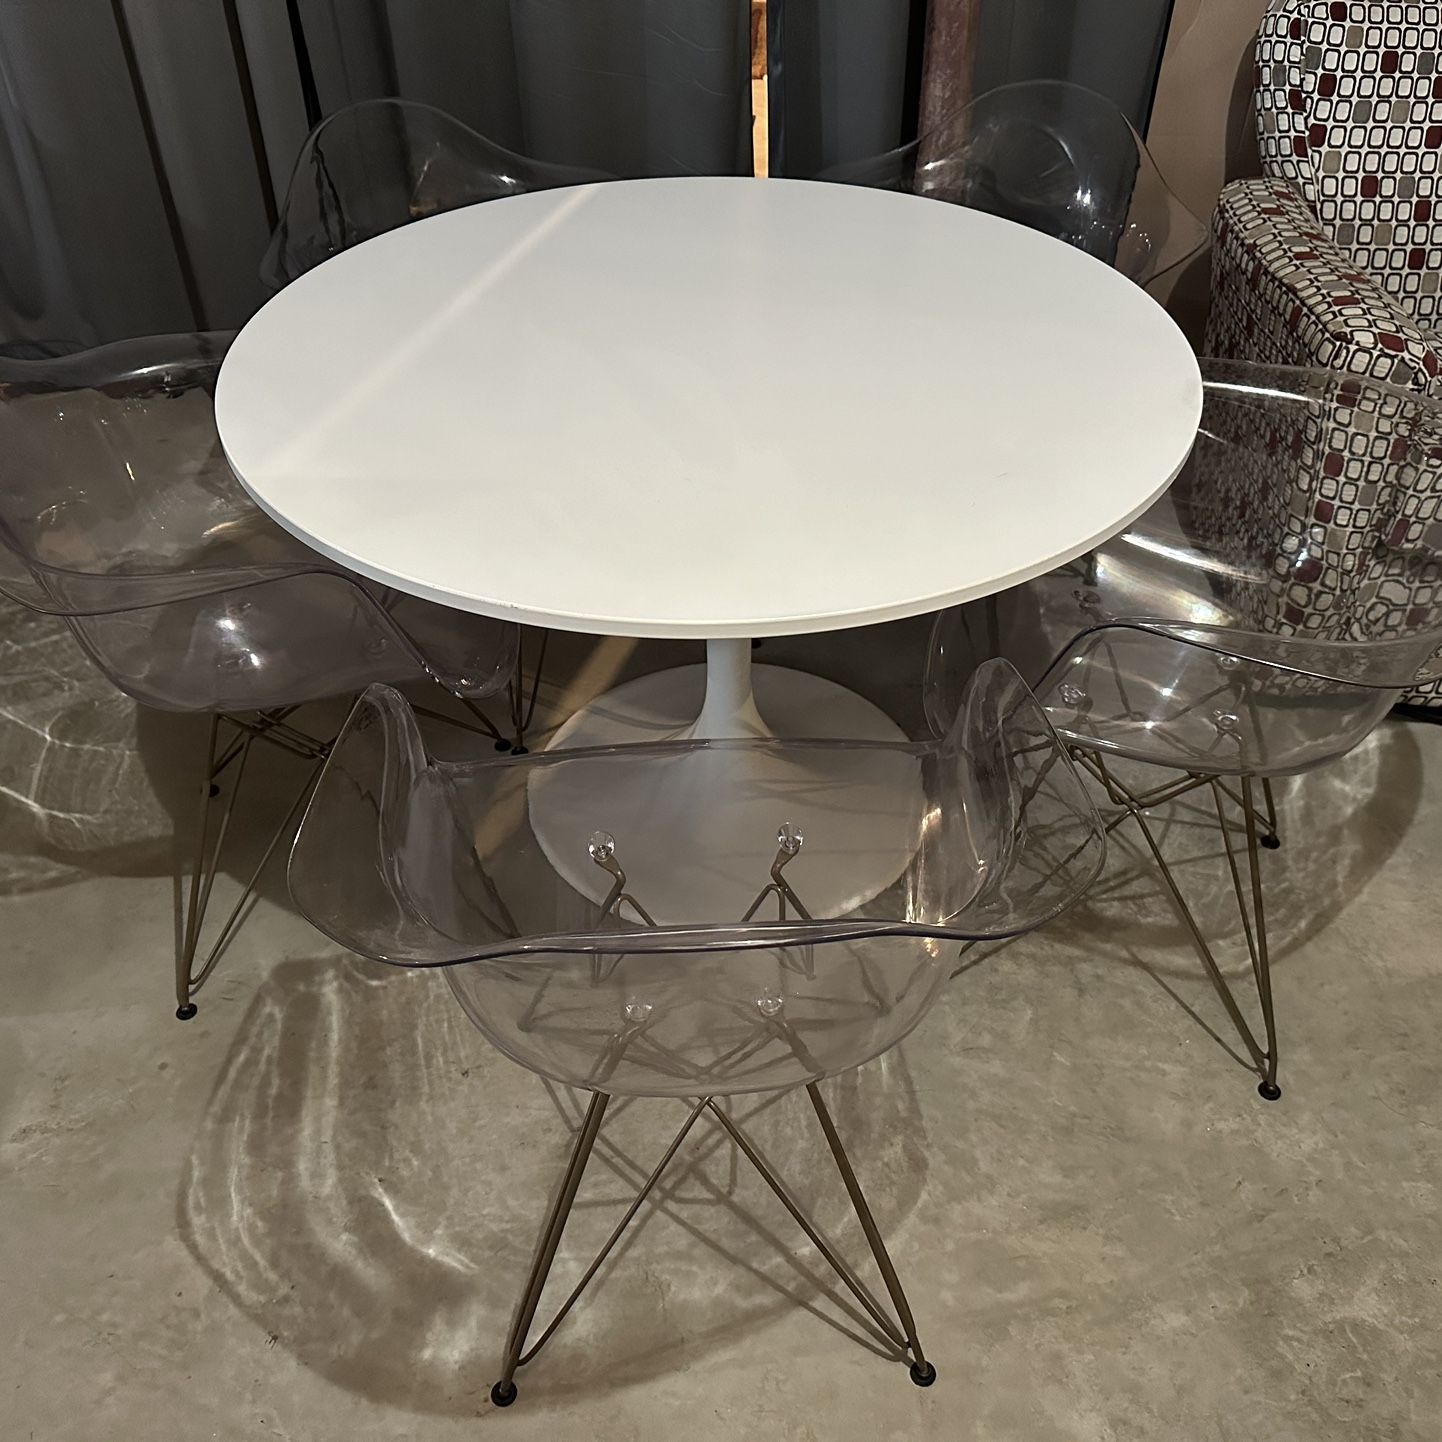 Modern Acrylic Dining Set Chairs And Round Table